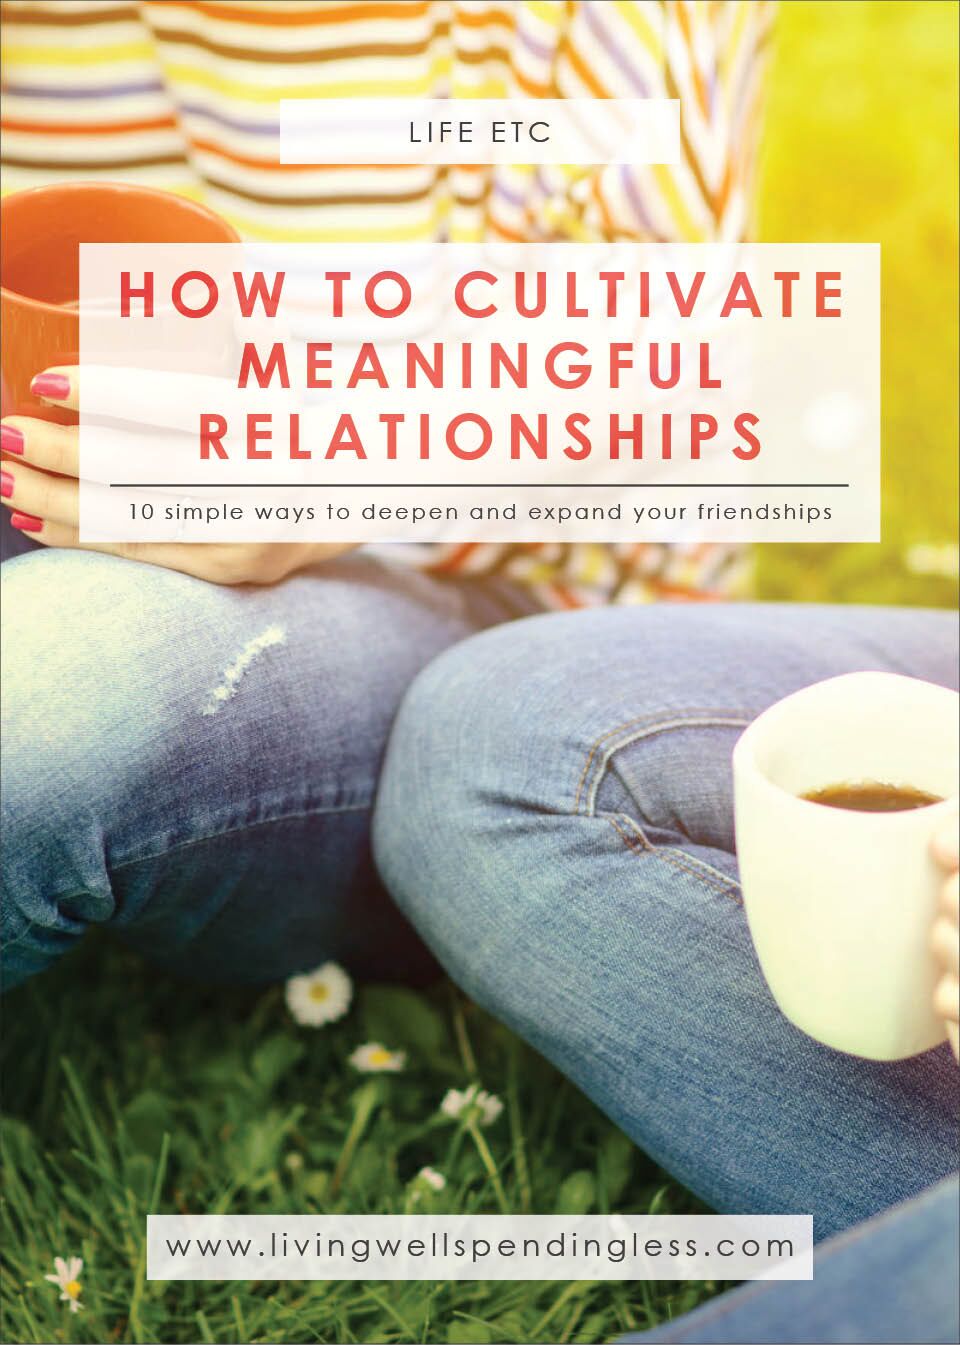 How to Cultivate Meaningful Relationships | Create Closer Friendships | Building Meaningful Relationships | Peaceful Mind